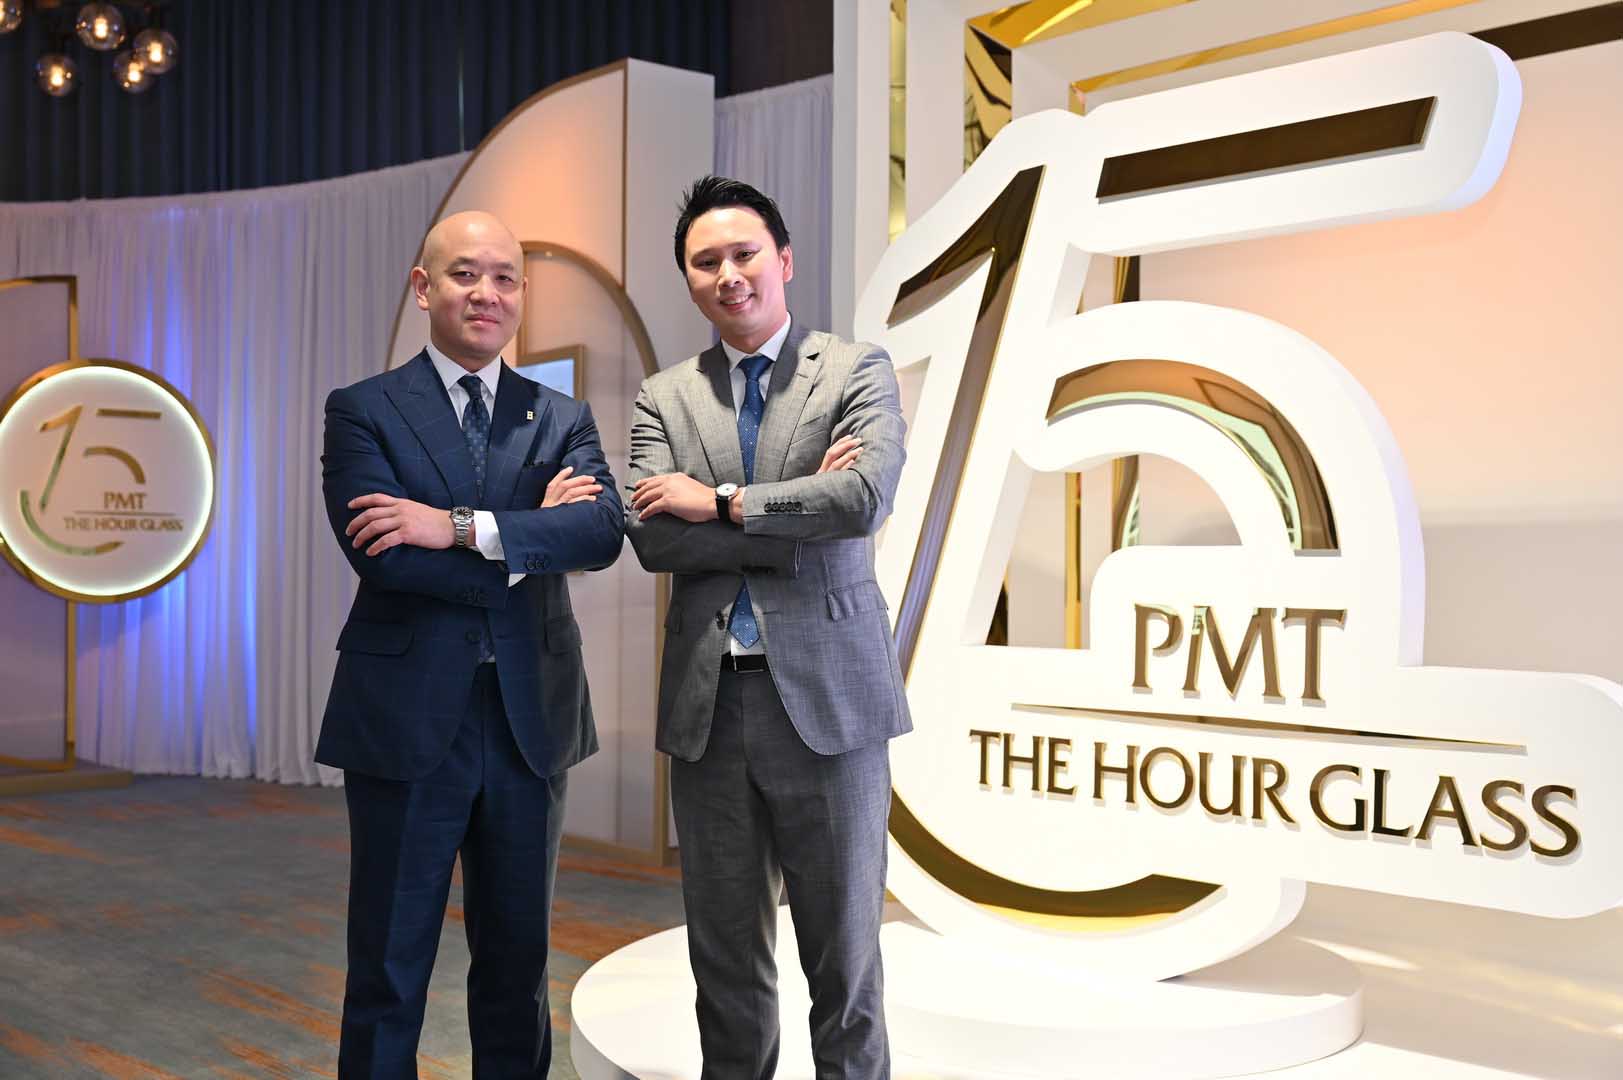 PMT The Hour Glass ฉลอง 15 ปี